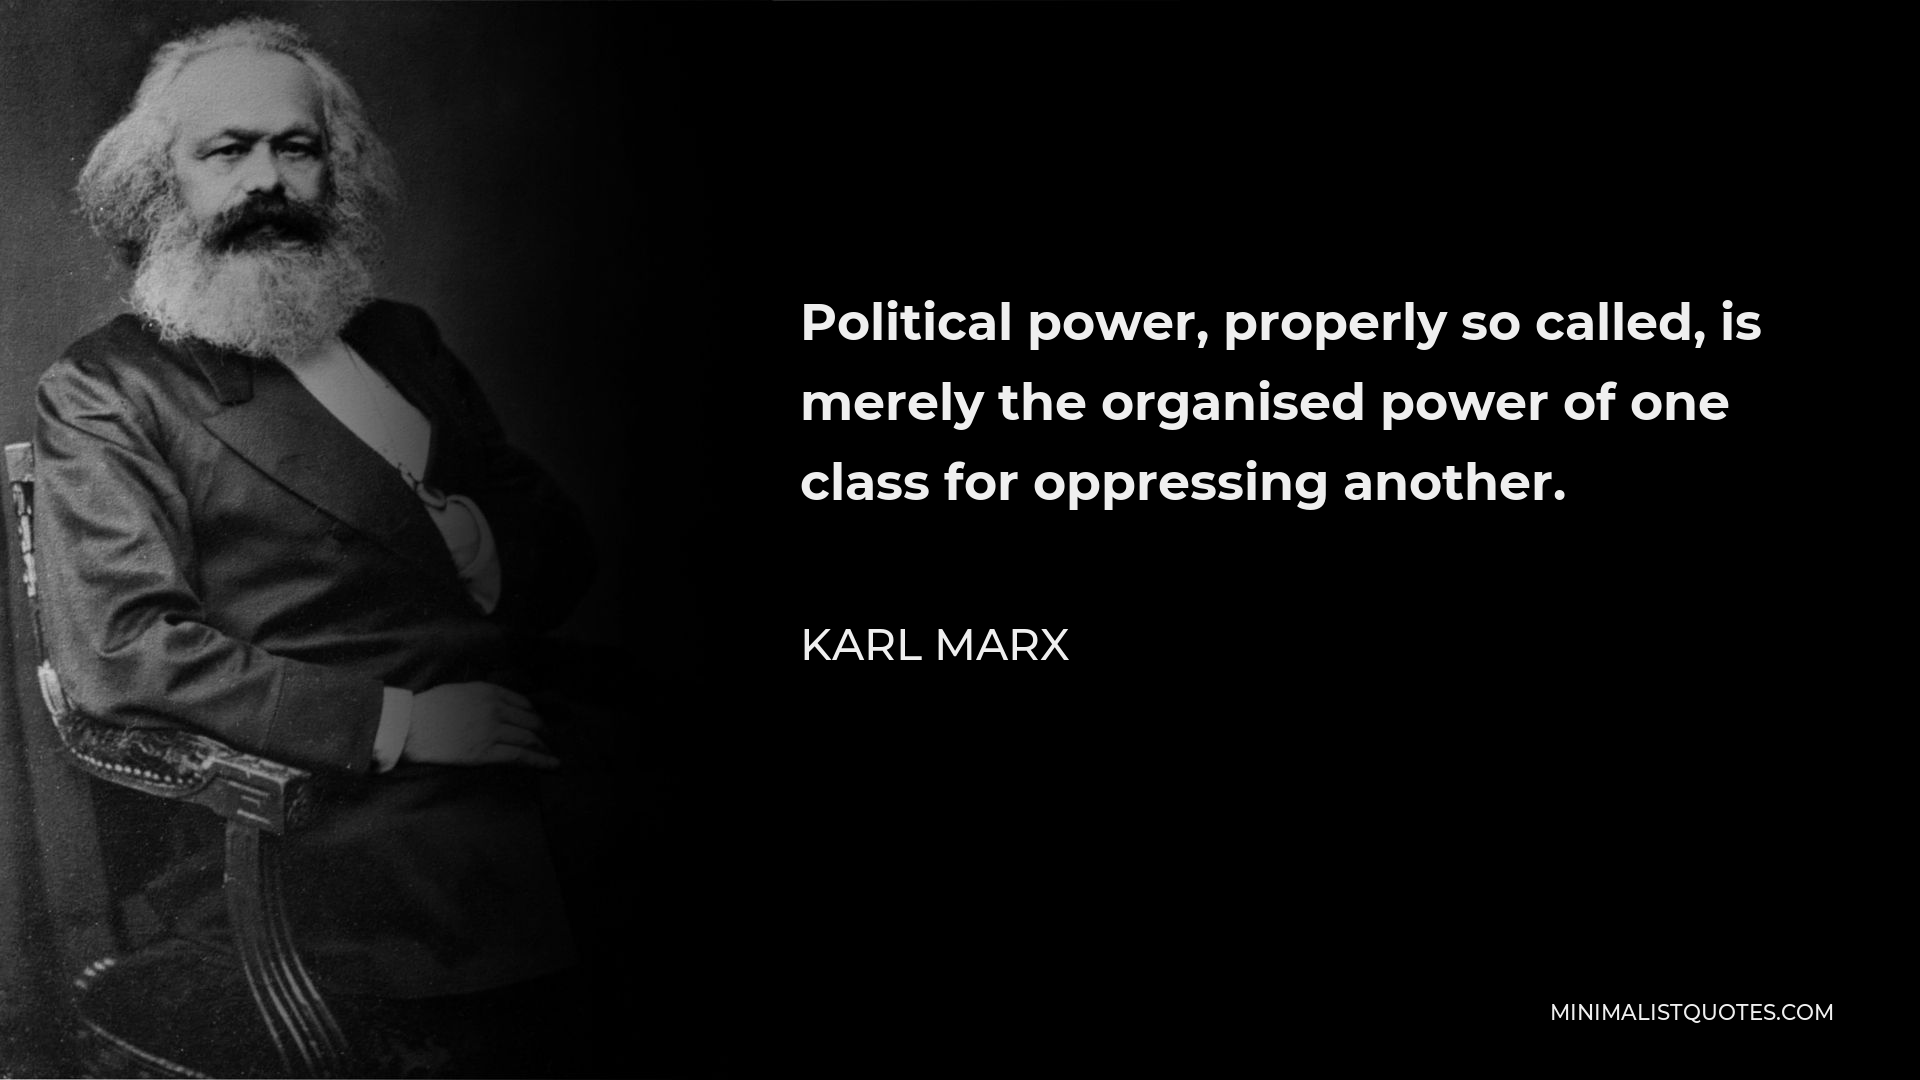 Karl Marx Quote - Political power, properly so called, is merely the organised power of one class for oppressing another.